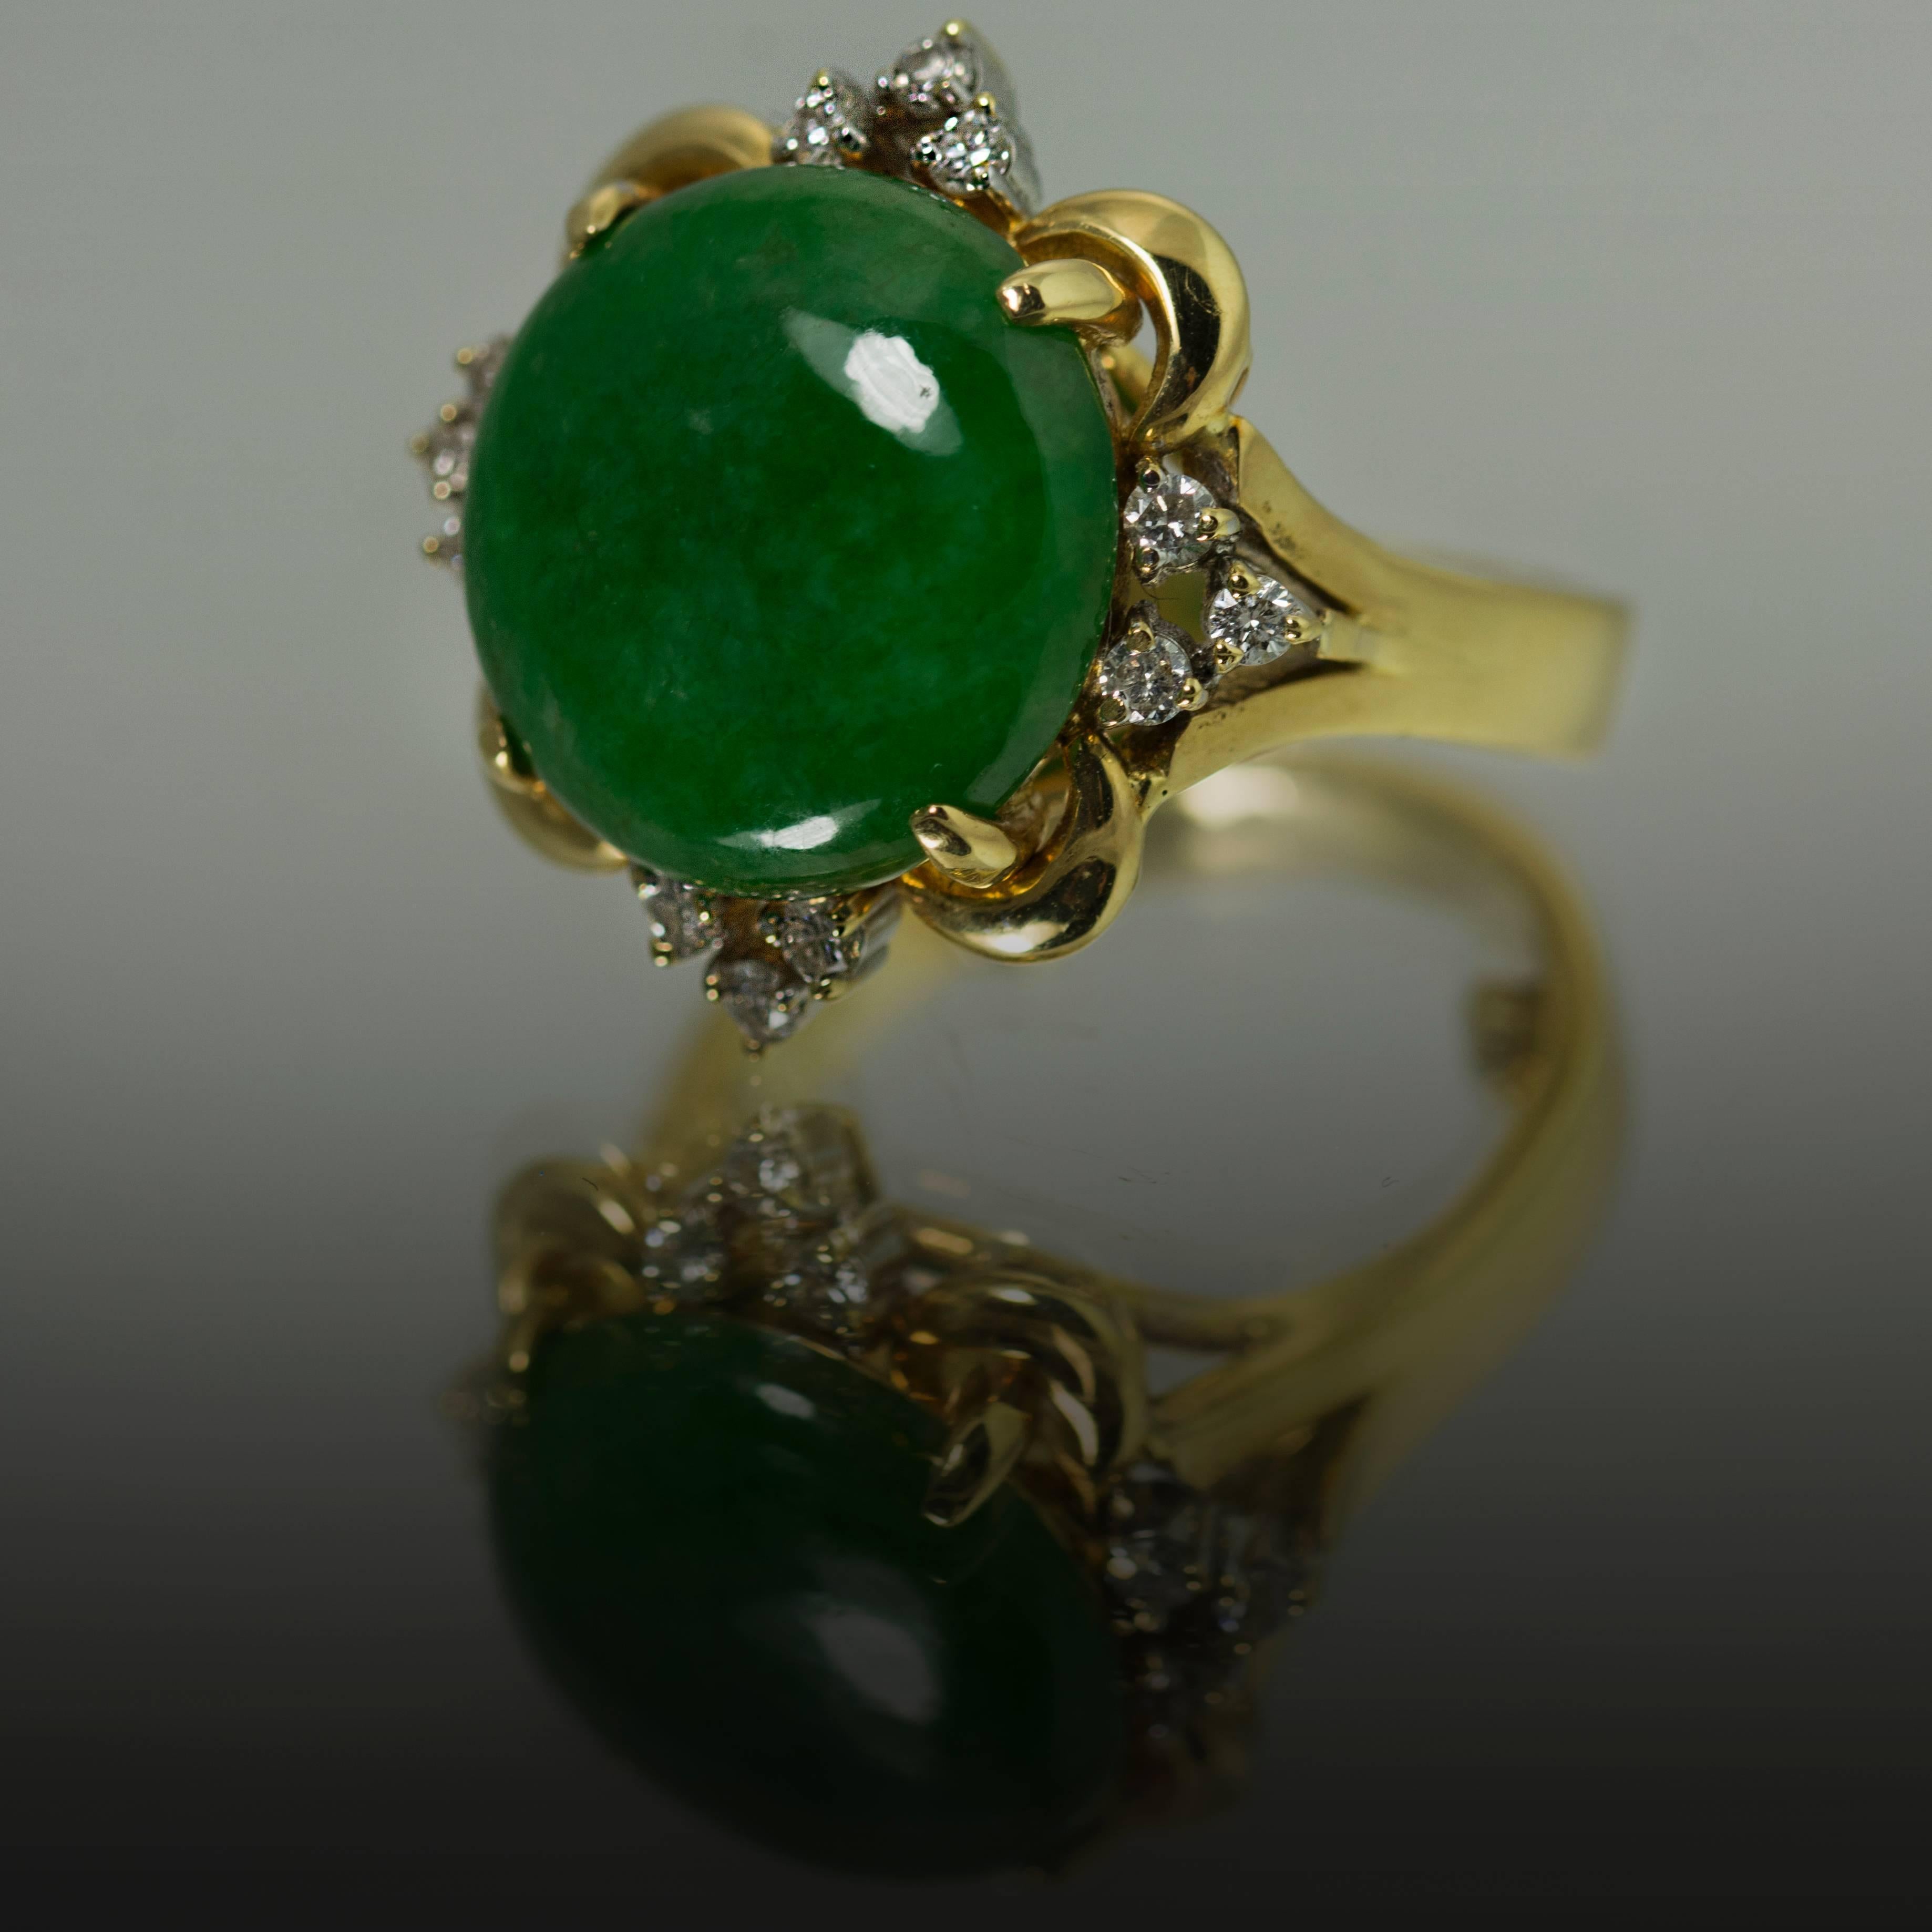 18k Ring with one Jade cabochon weighing approximately 8.00 carats and approximately 0.18 carats of diamonds